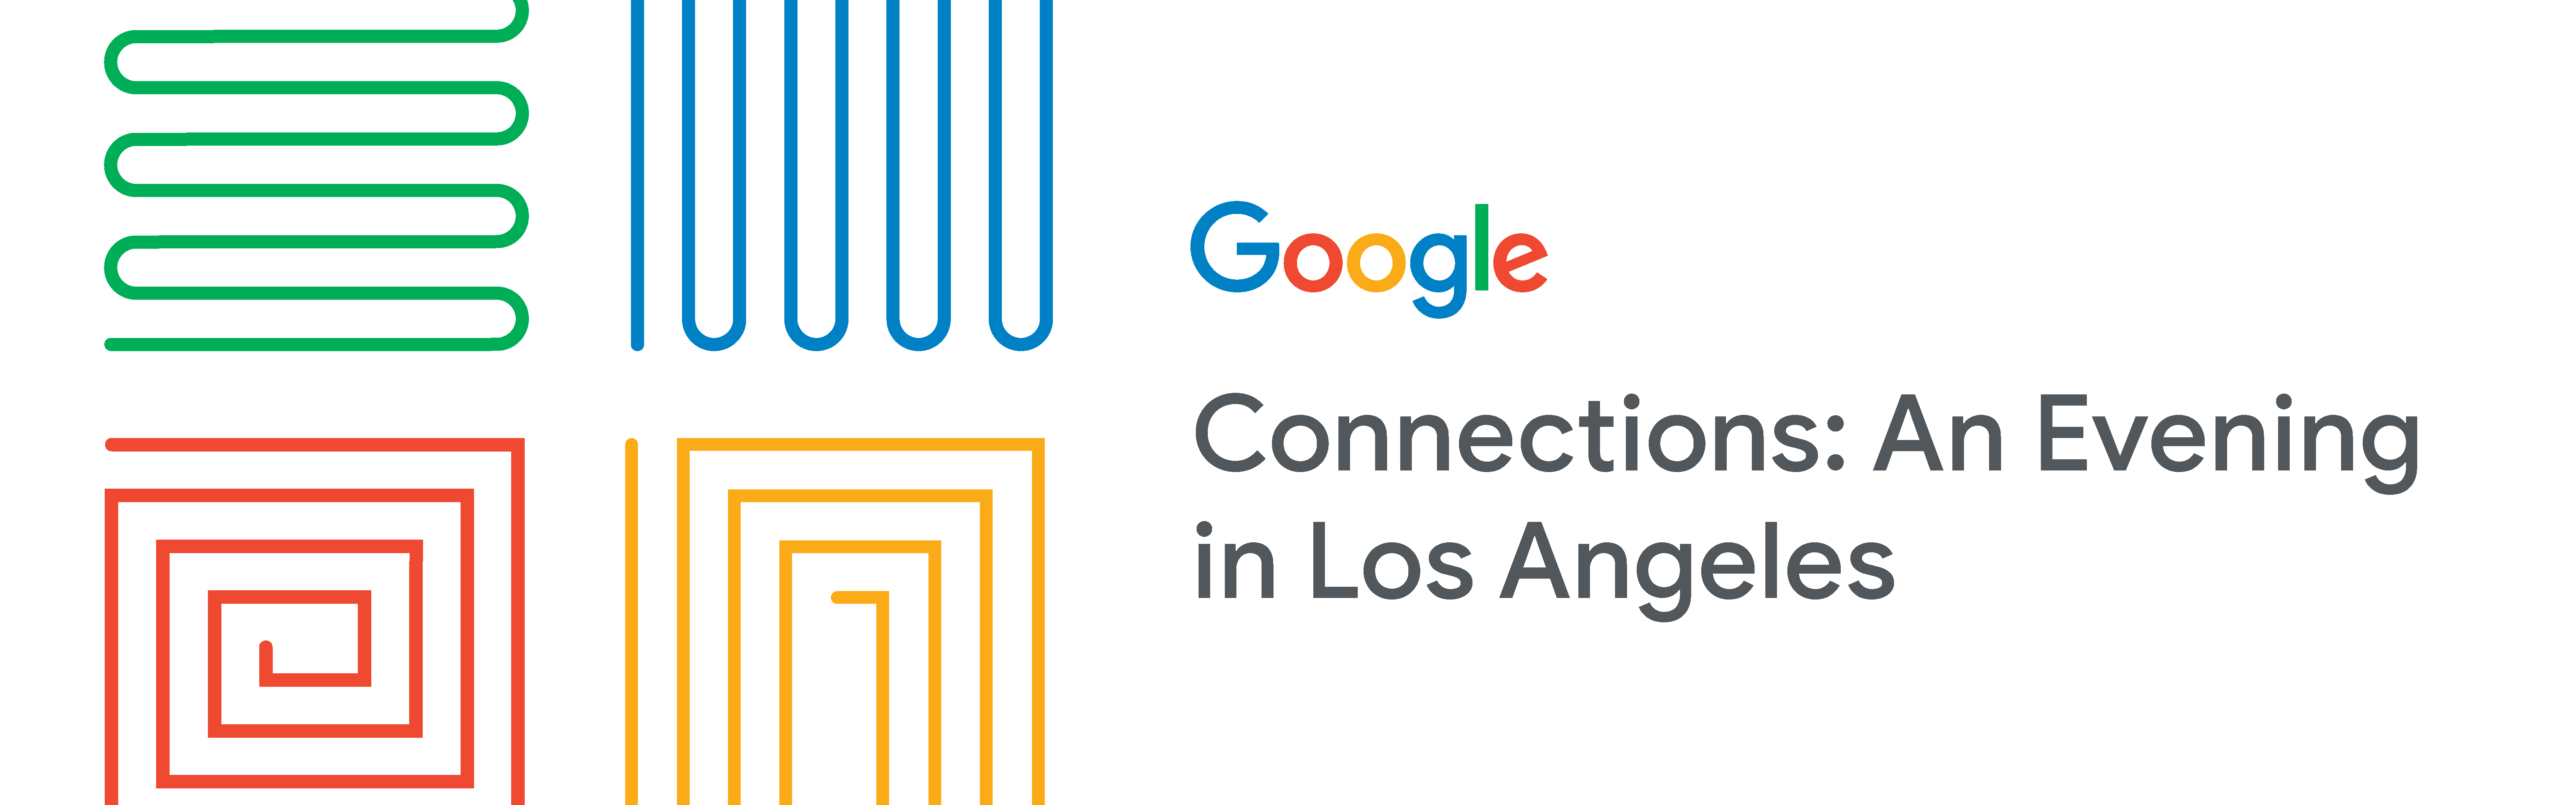 Google Connections: An Evening in Los Angeles